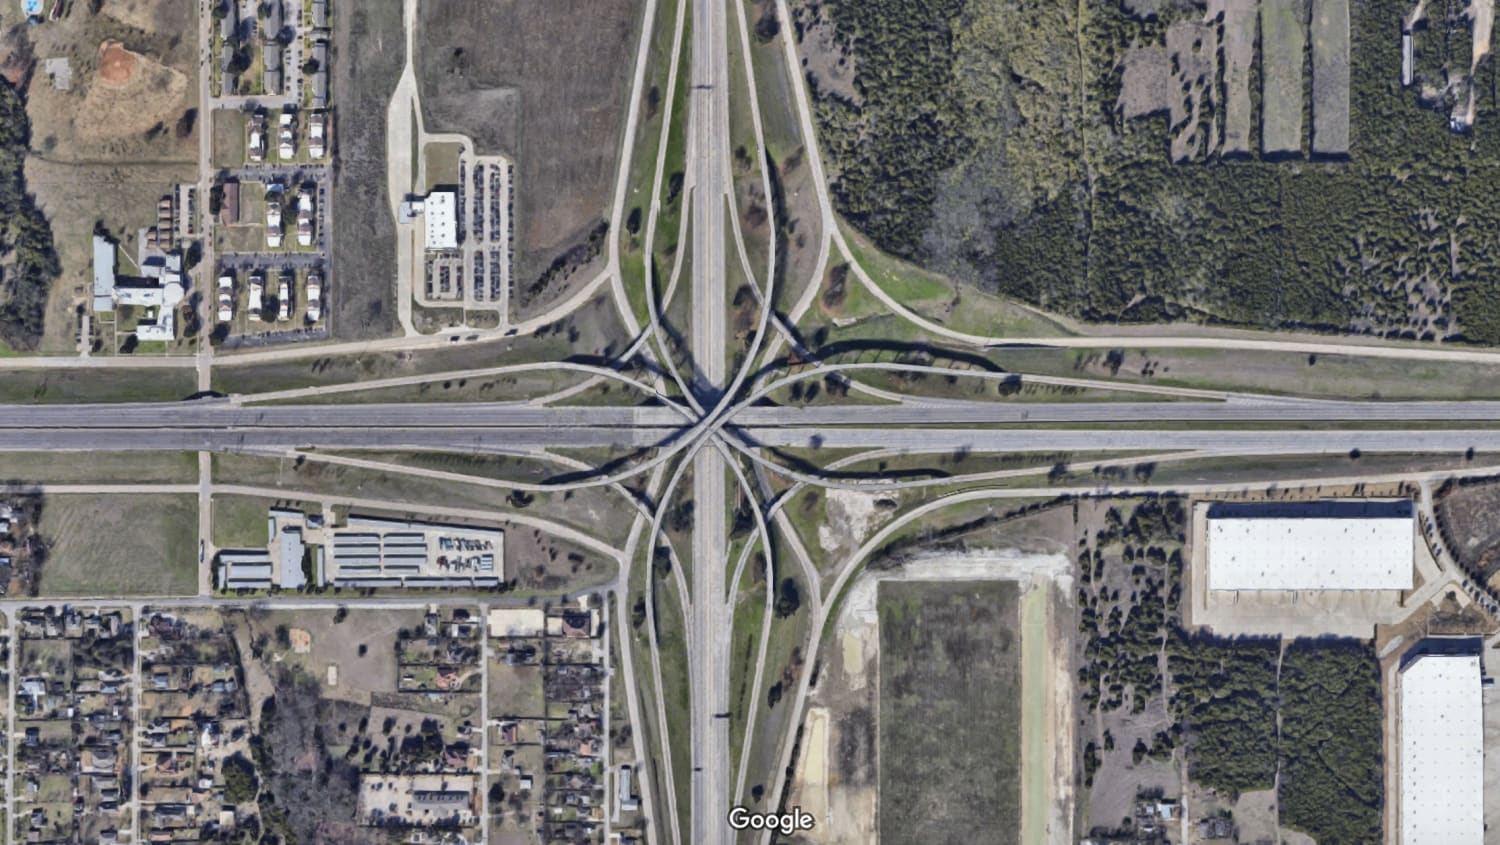 The symmetry of the interchange between Interstates 20 and 35E in Dallas